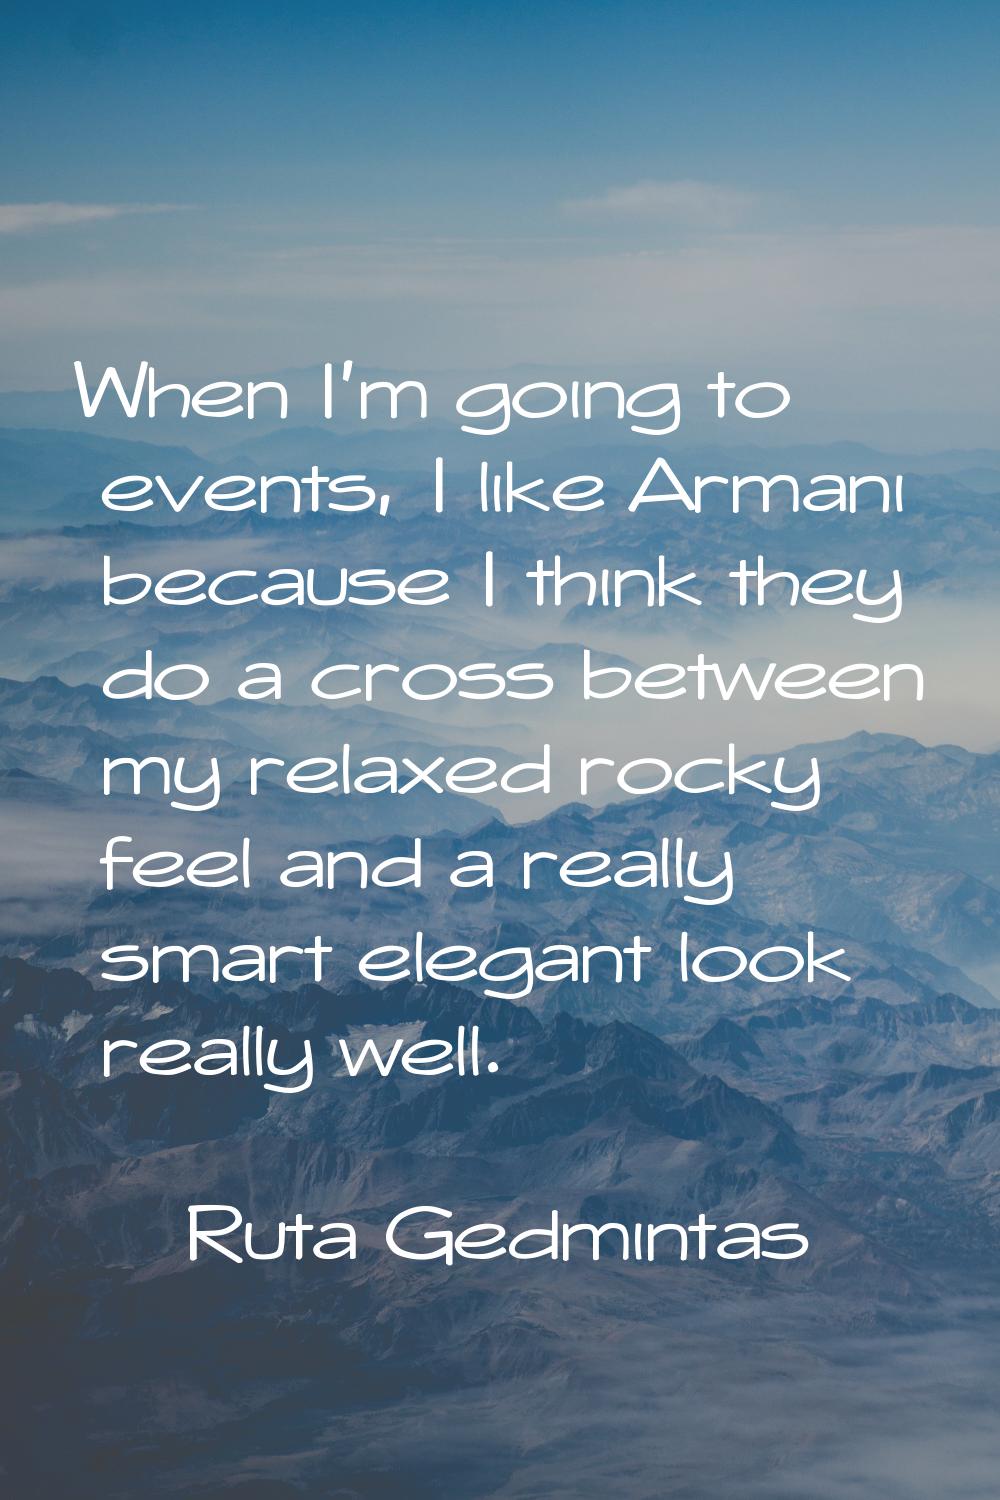 When I'm going to events, I like Armani because I think they do a cross between my relaxed rocky fe